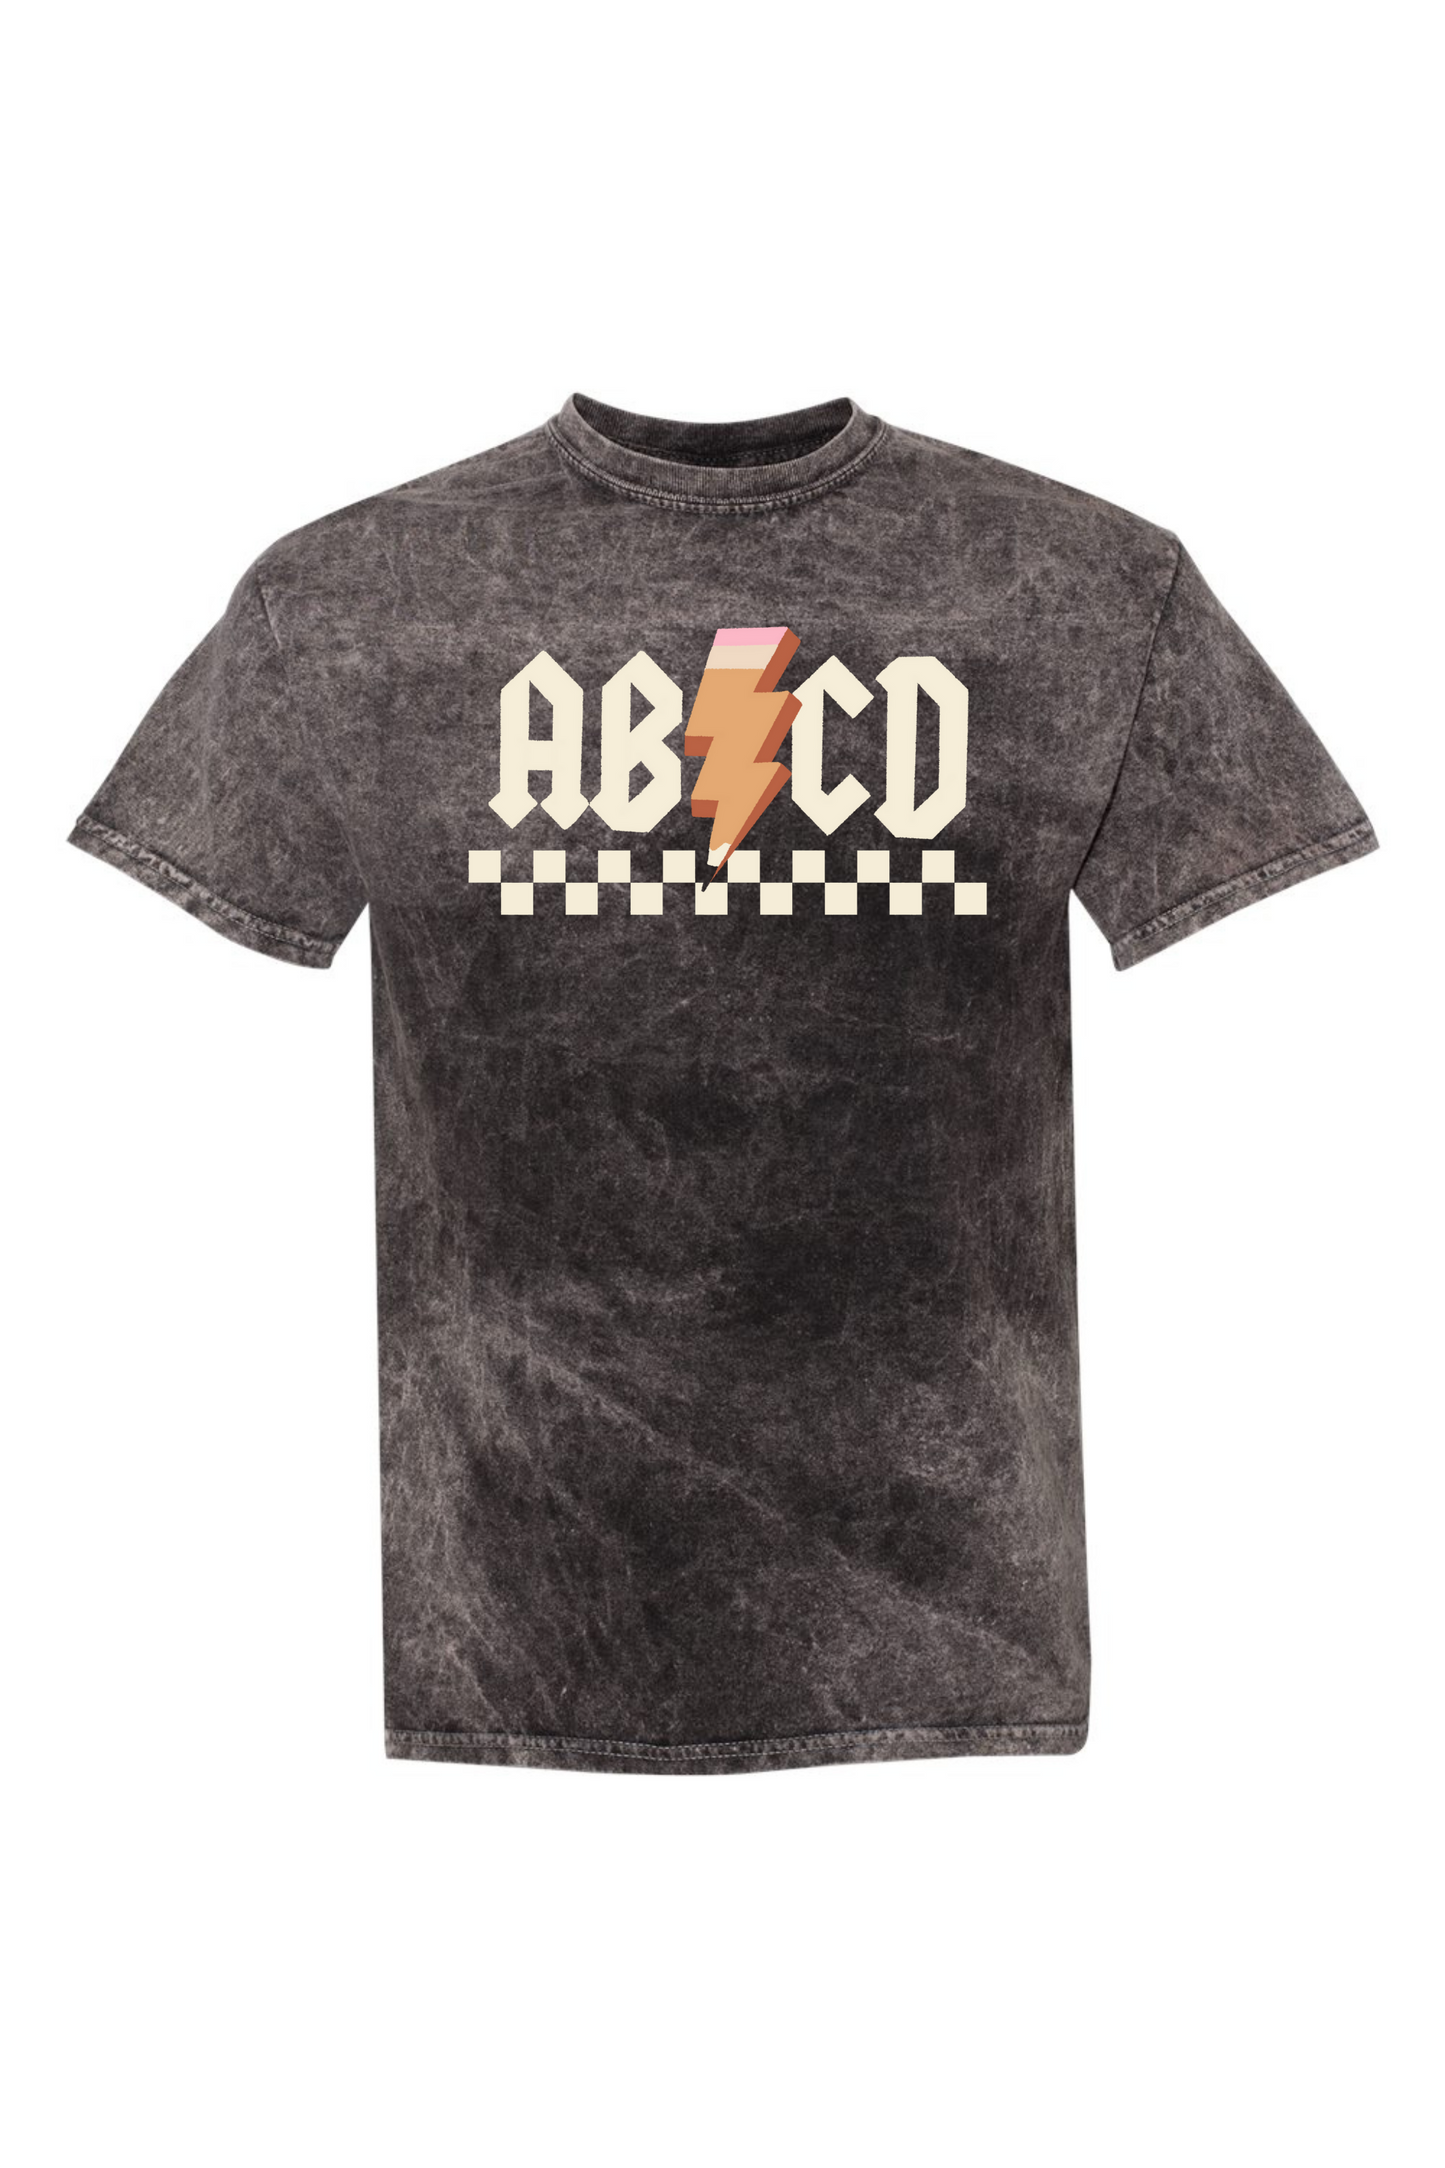 AB⚡CD | Mineral Wash Adult Tee-Adult Tee-Sister Shirts-Sister Shirts, Cute & Custom Tees for Mama & Littles in Trussville, Alabama.